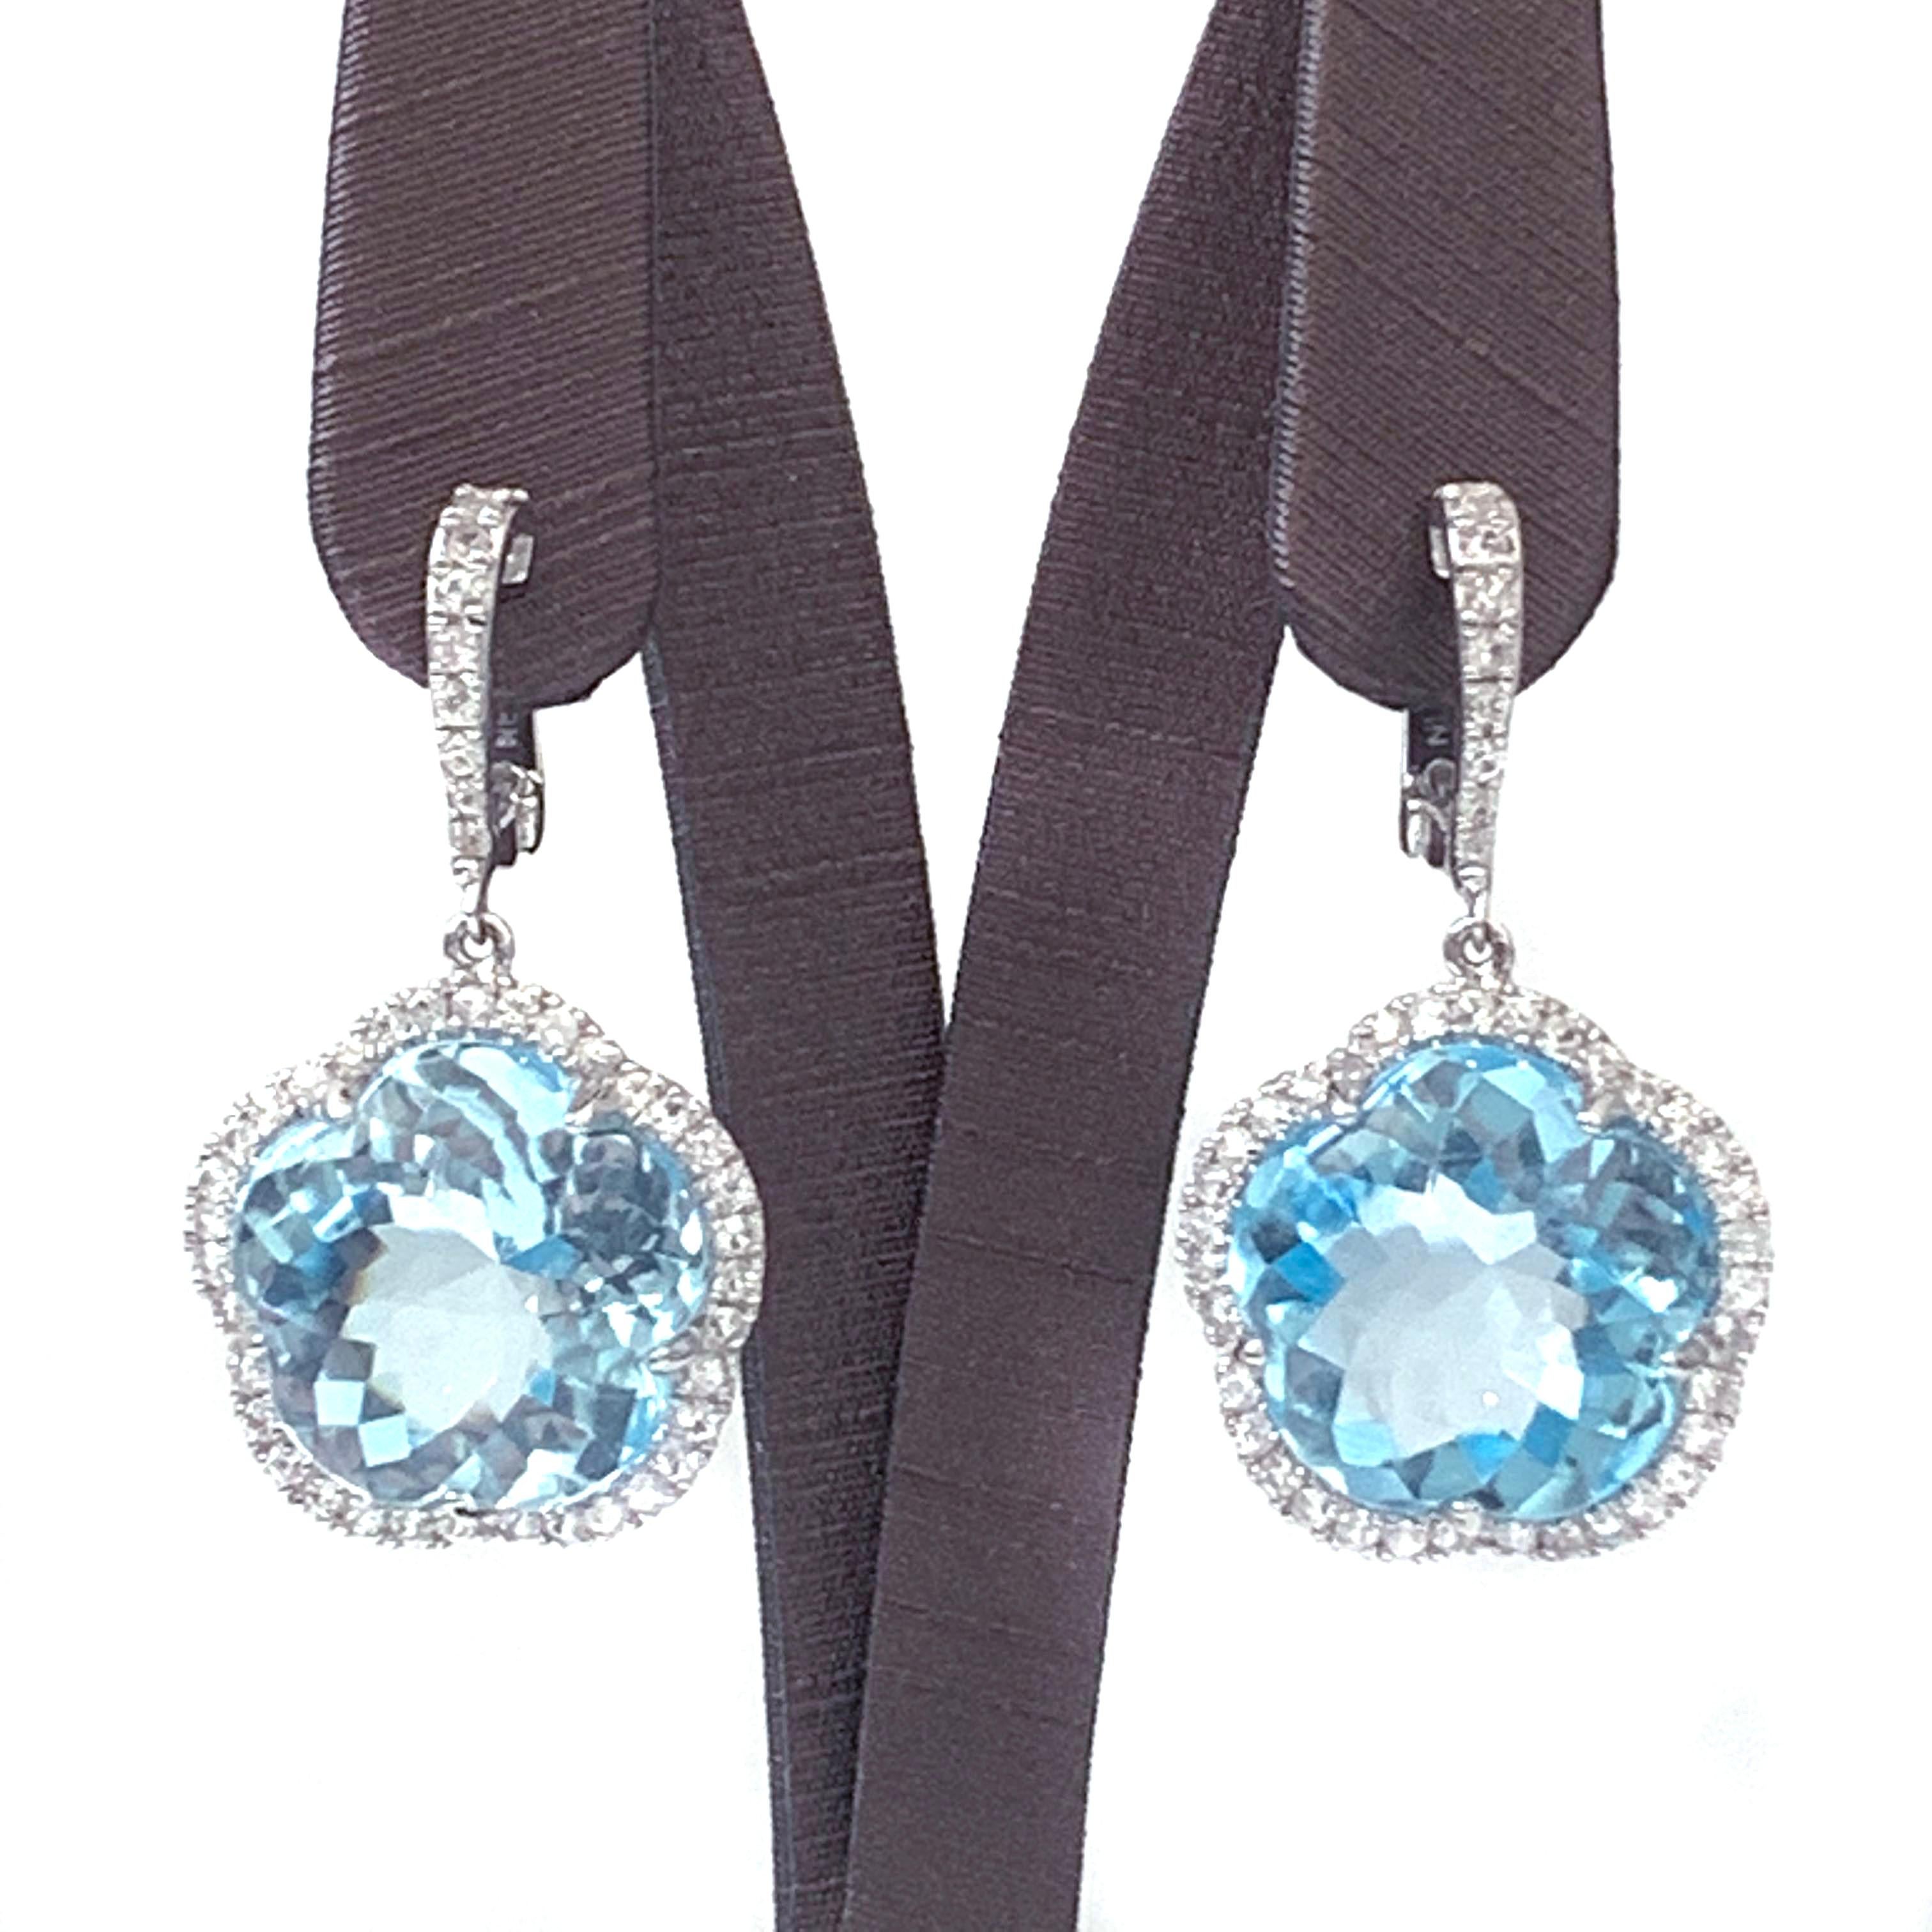 Stunning 30ct Flower Blue Topaz & White Sapphire Earrings

The earrings feature 2 beautiful flower-shape cabochon/facet-cut genuine blue topaz (15mm size, 30ct total), adorned with 90pcs of round white sapphire (1ct t.w.), handset in platinum